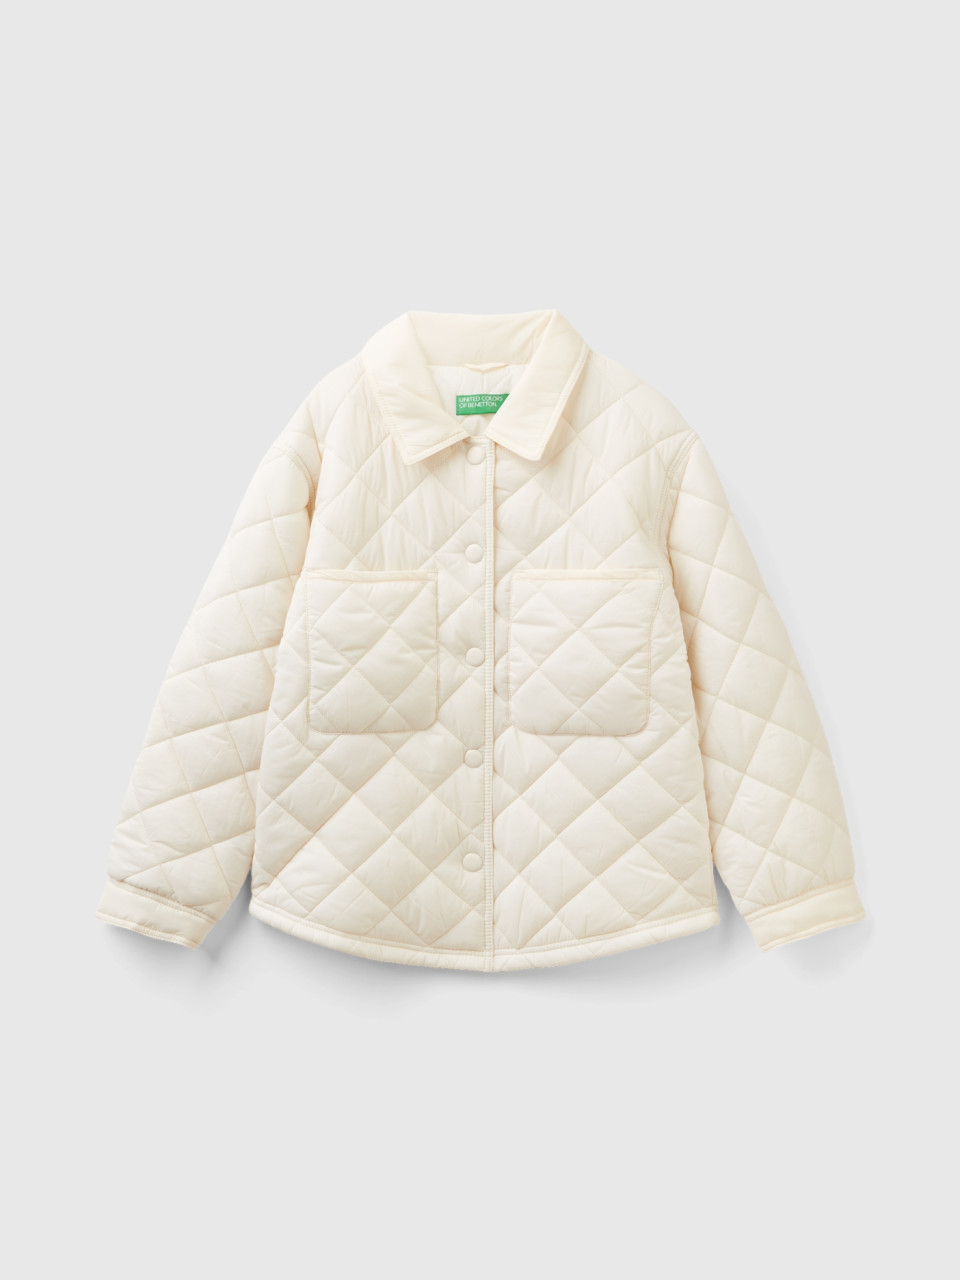 Benetton, Light Quilted Jacket, Creamy White, Kids